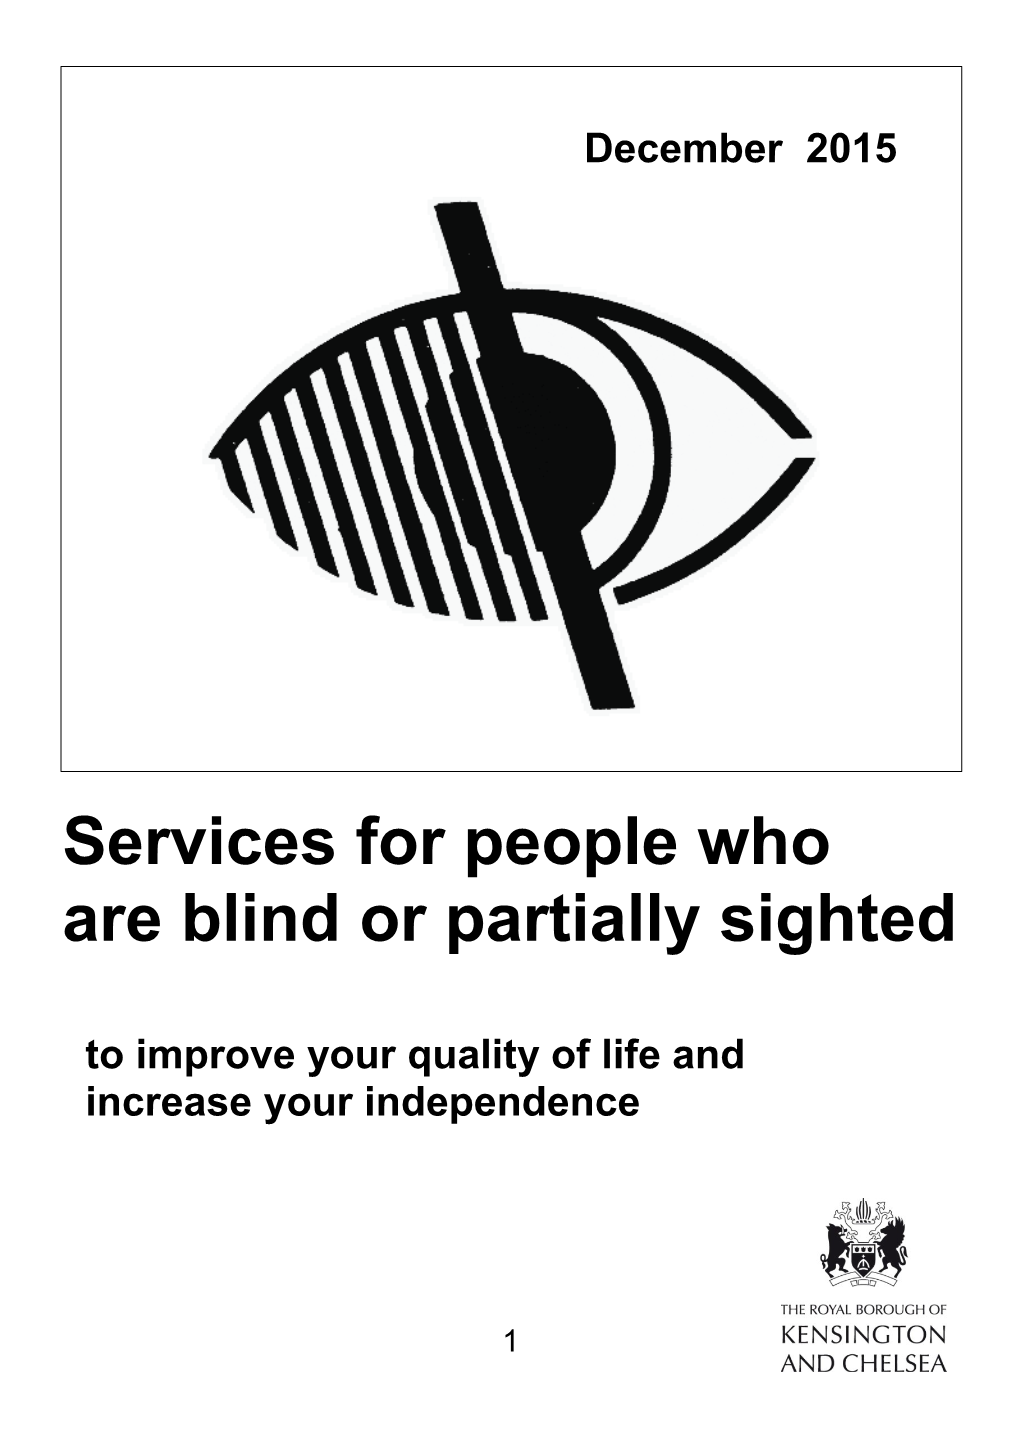 Services for Blind and Partially-Sighted People